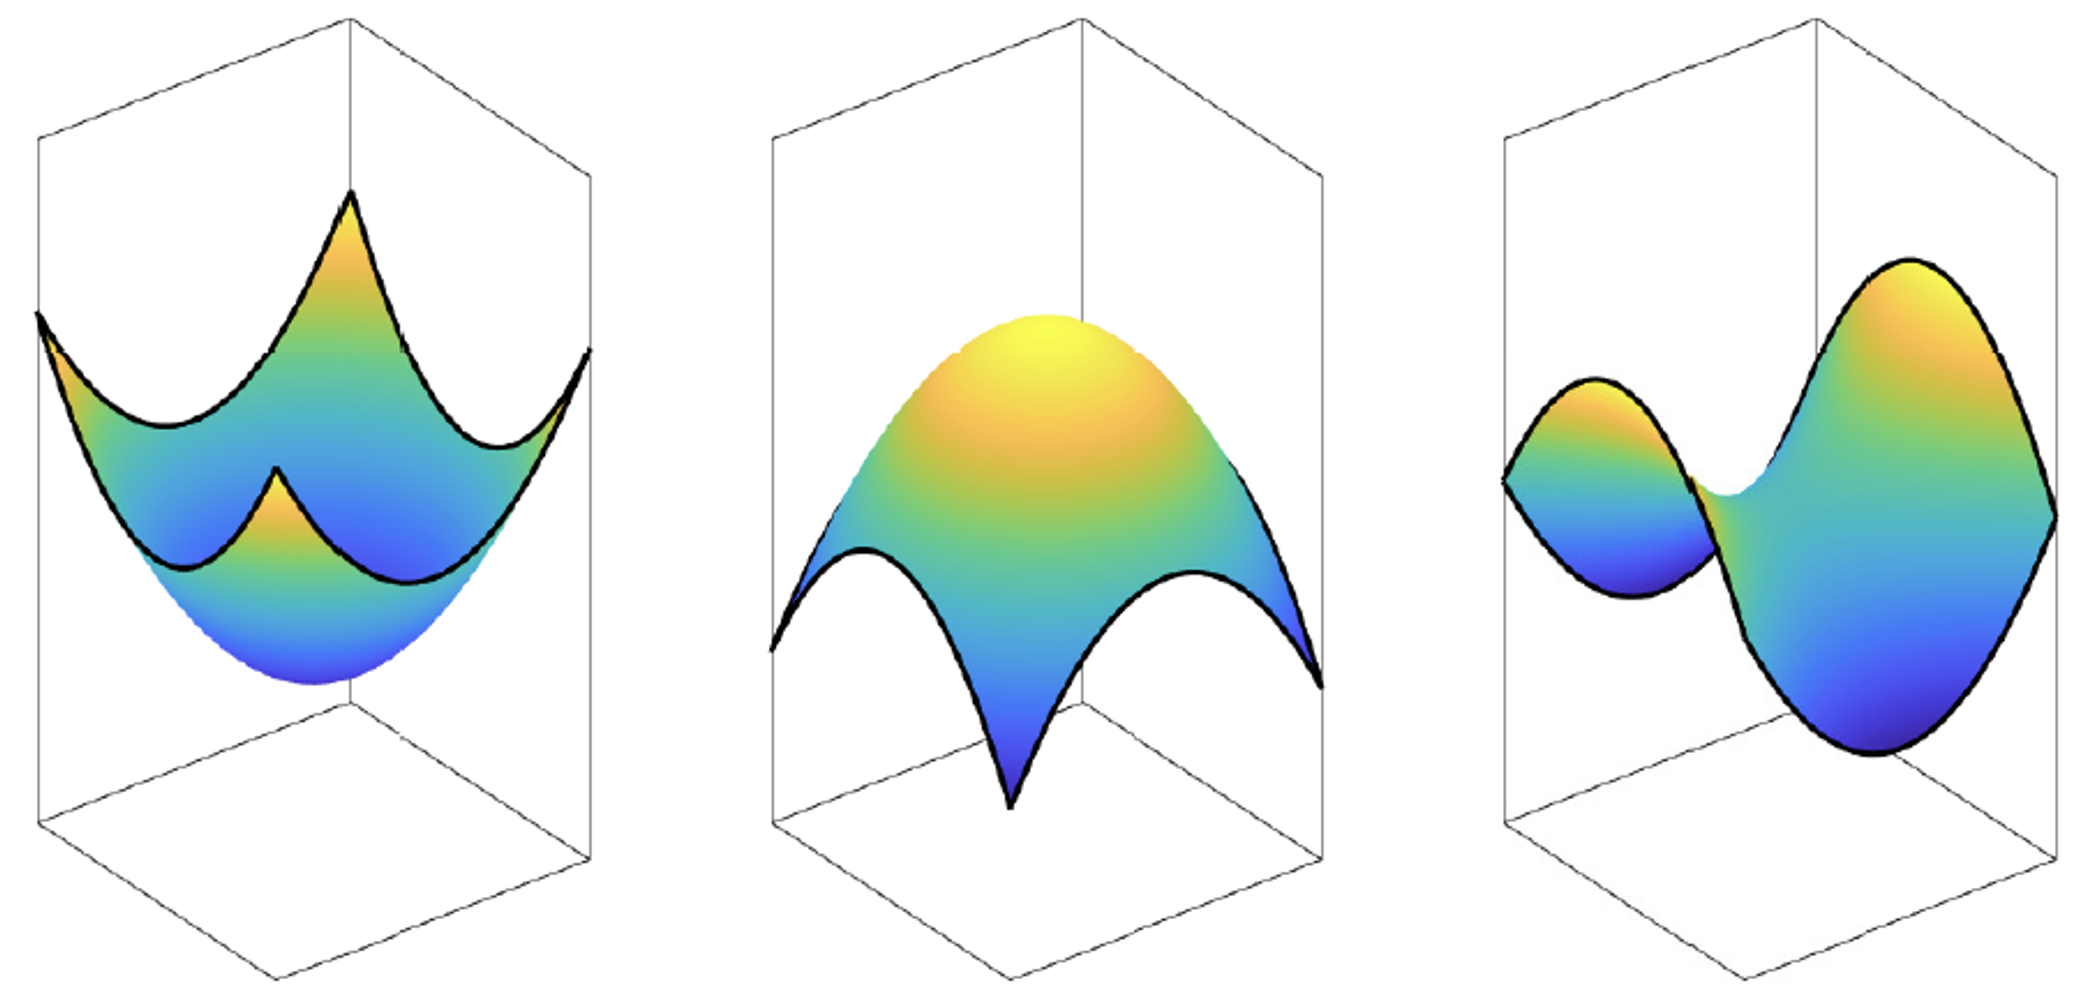 Optical surfaces which are either convex (left), concave (middle) or saddle-like (right).